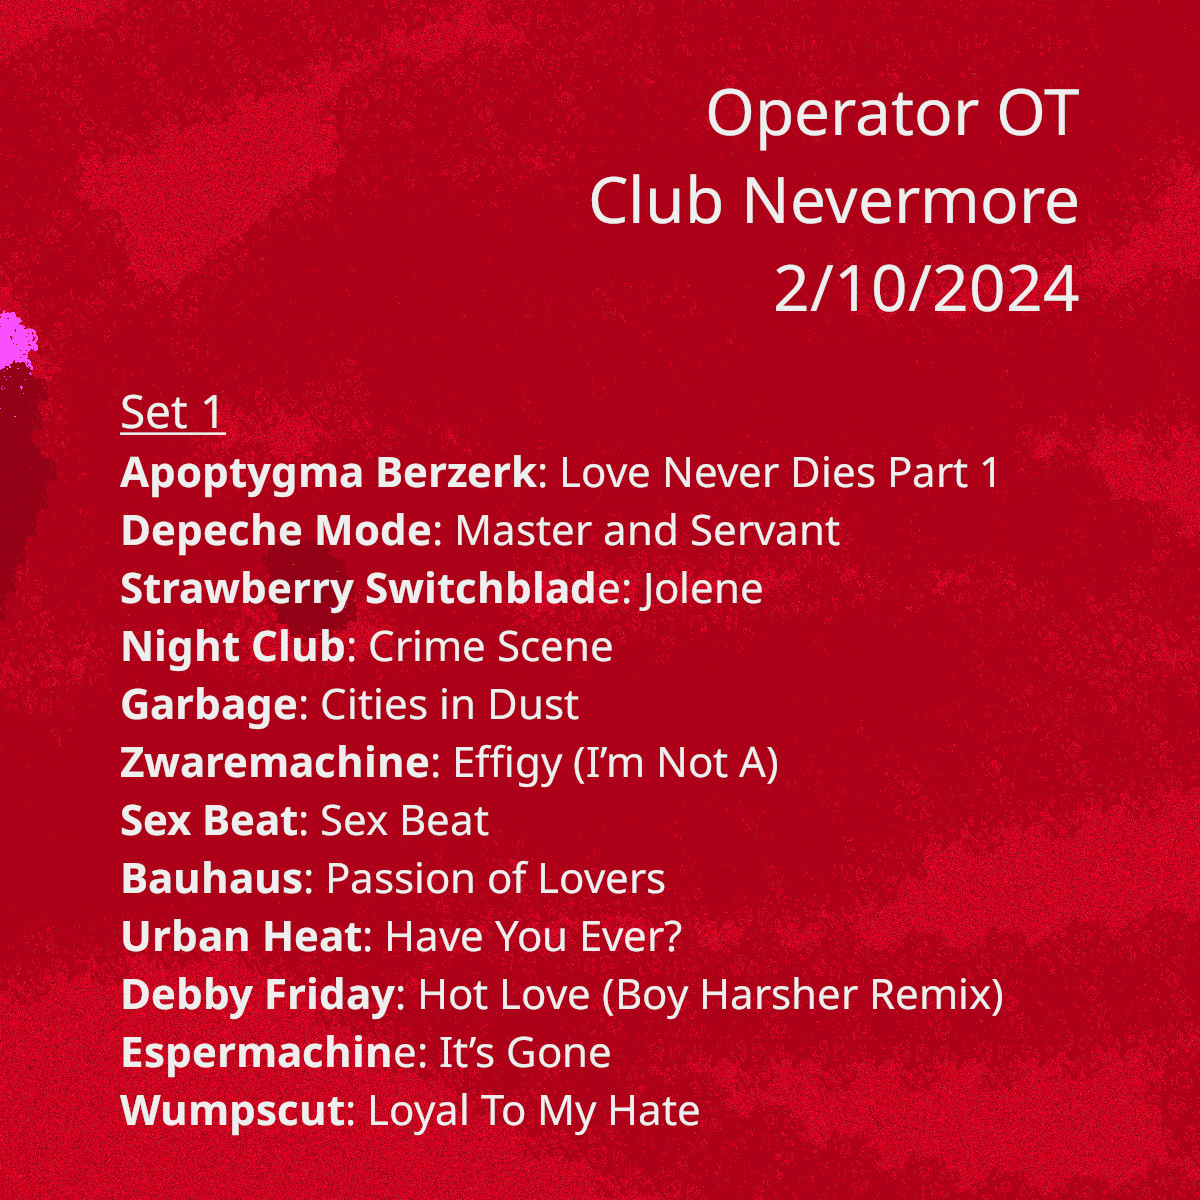 The set list from Operator OT&rsquo;s first set at Club Nevermore on February 10, 2024. The set list is in the text below.